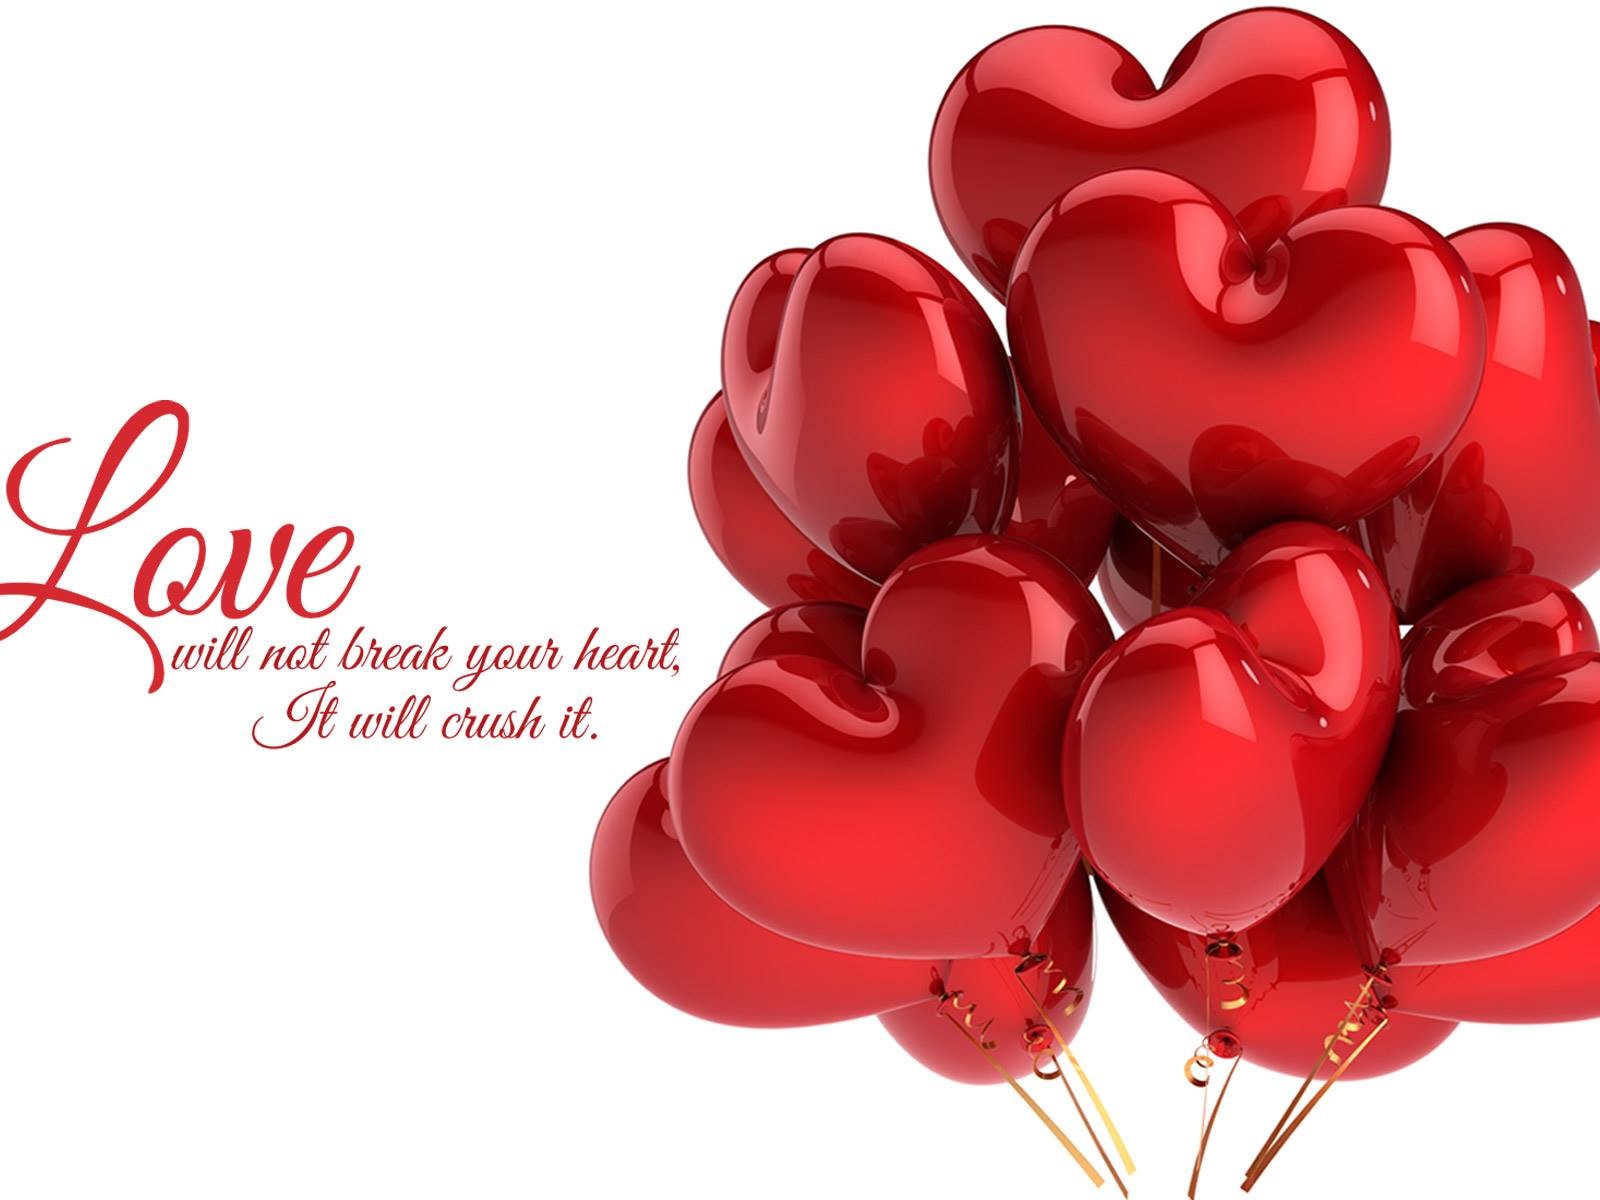 a kay hd wallpaper 2015,red,heart,valentine's day,love,petal